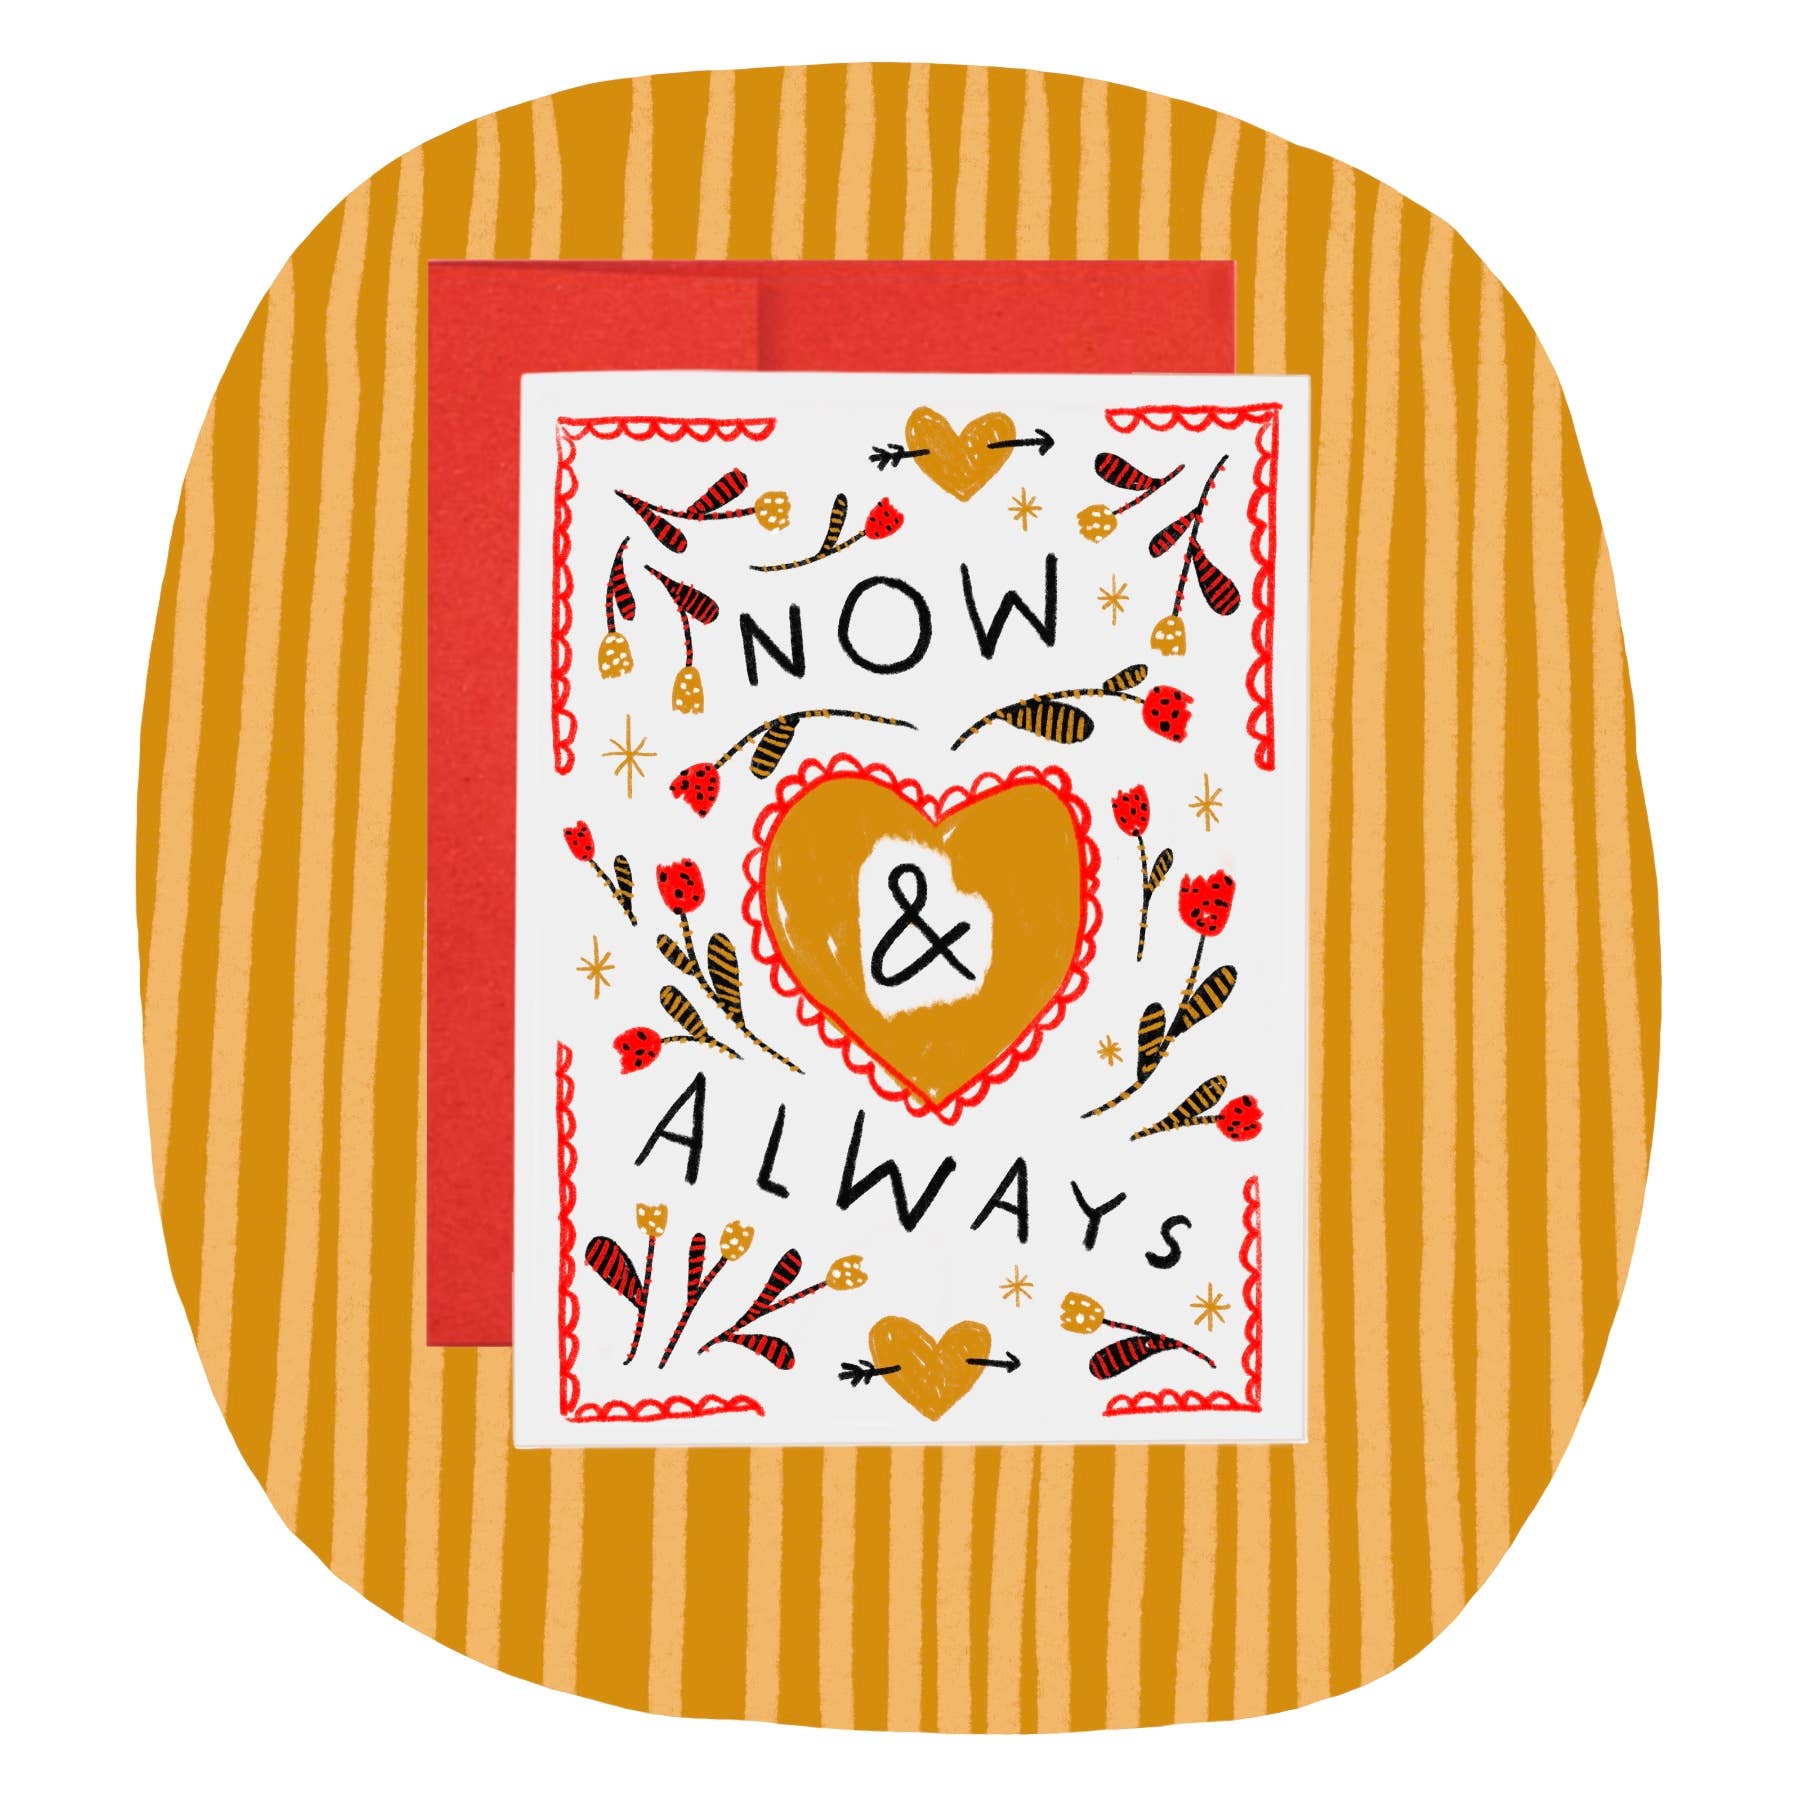 "NOW & ALWAYS" Greeting Card